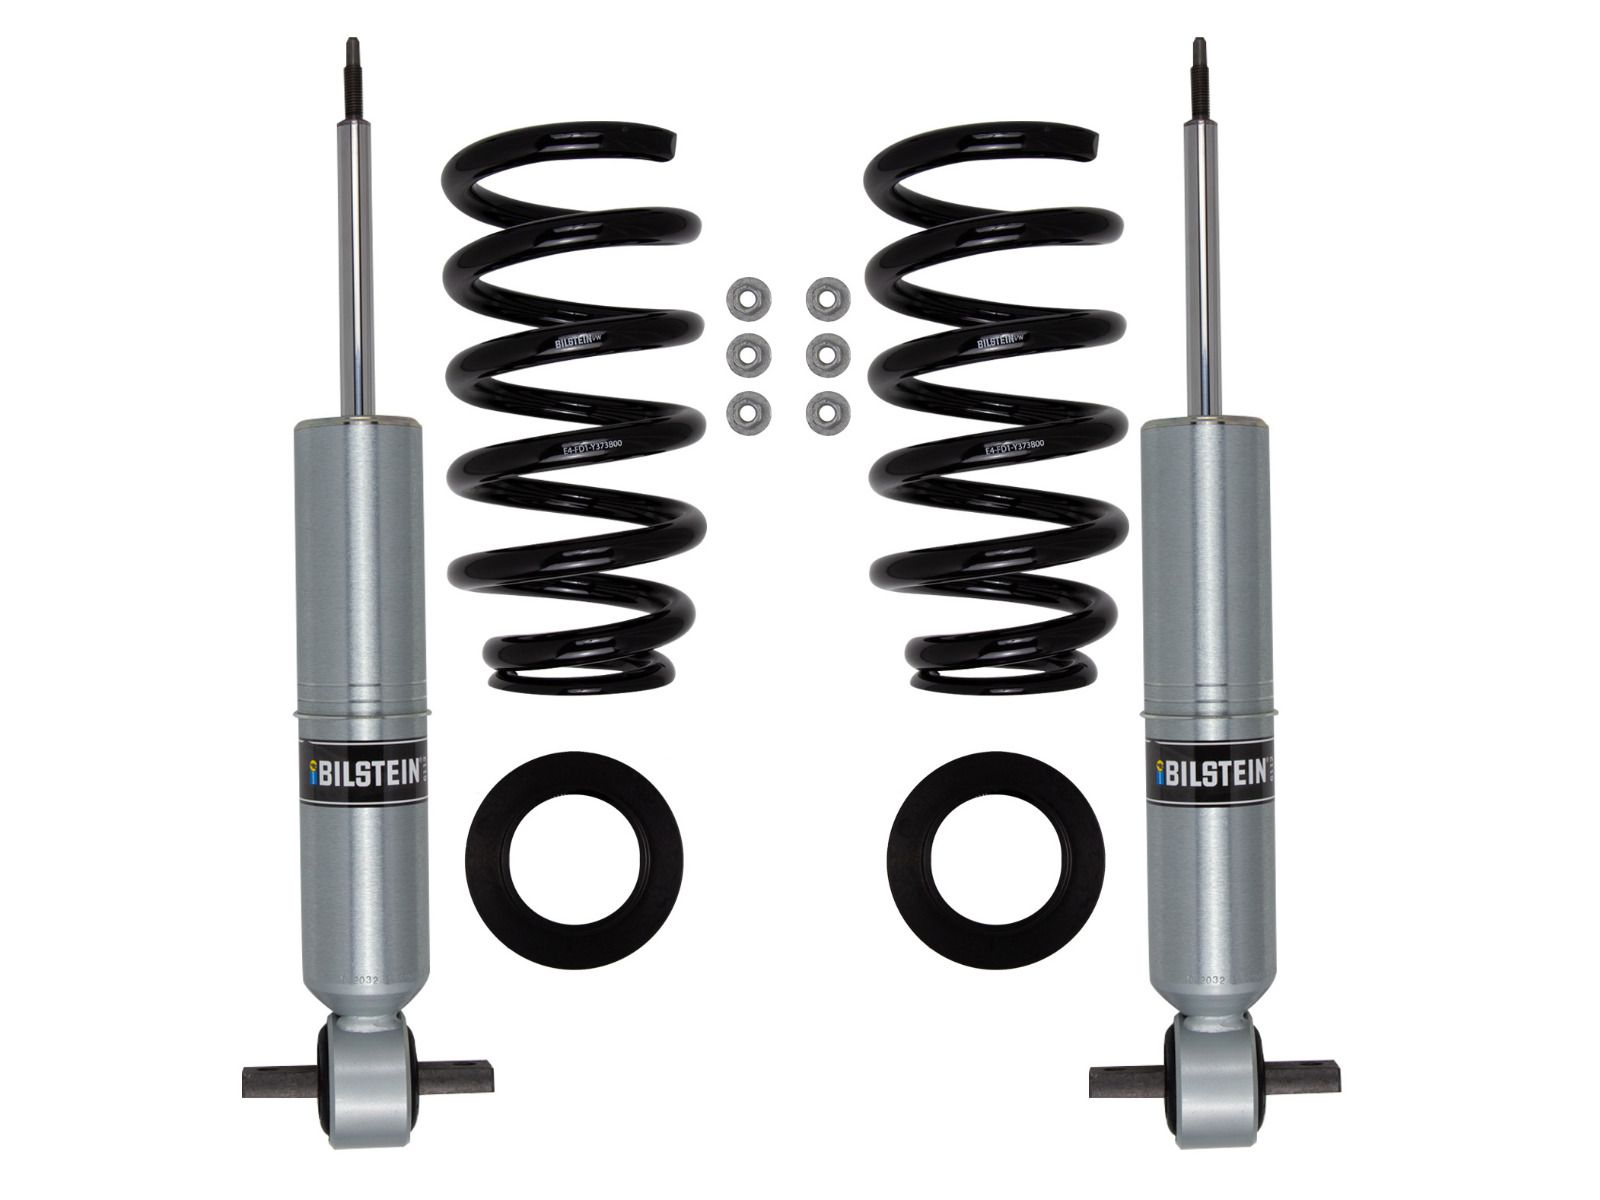 Silverado 1500 2007-2013 Chevy 4WD - Bilstein FRONT 6112 Series Coil-Over Kit (Adjustable Height 1.85"- 2.75" Front Lift)